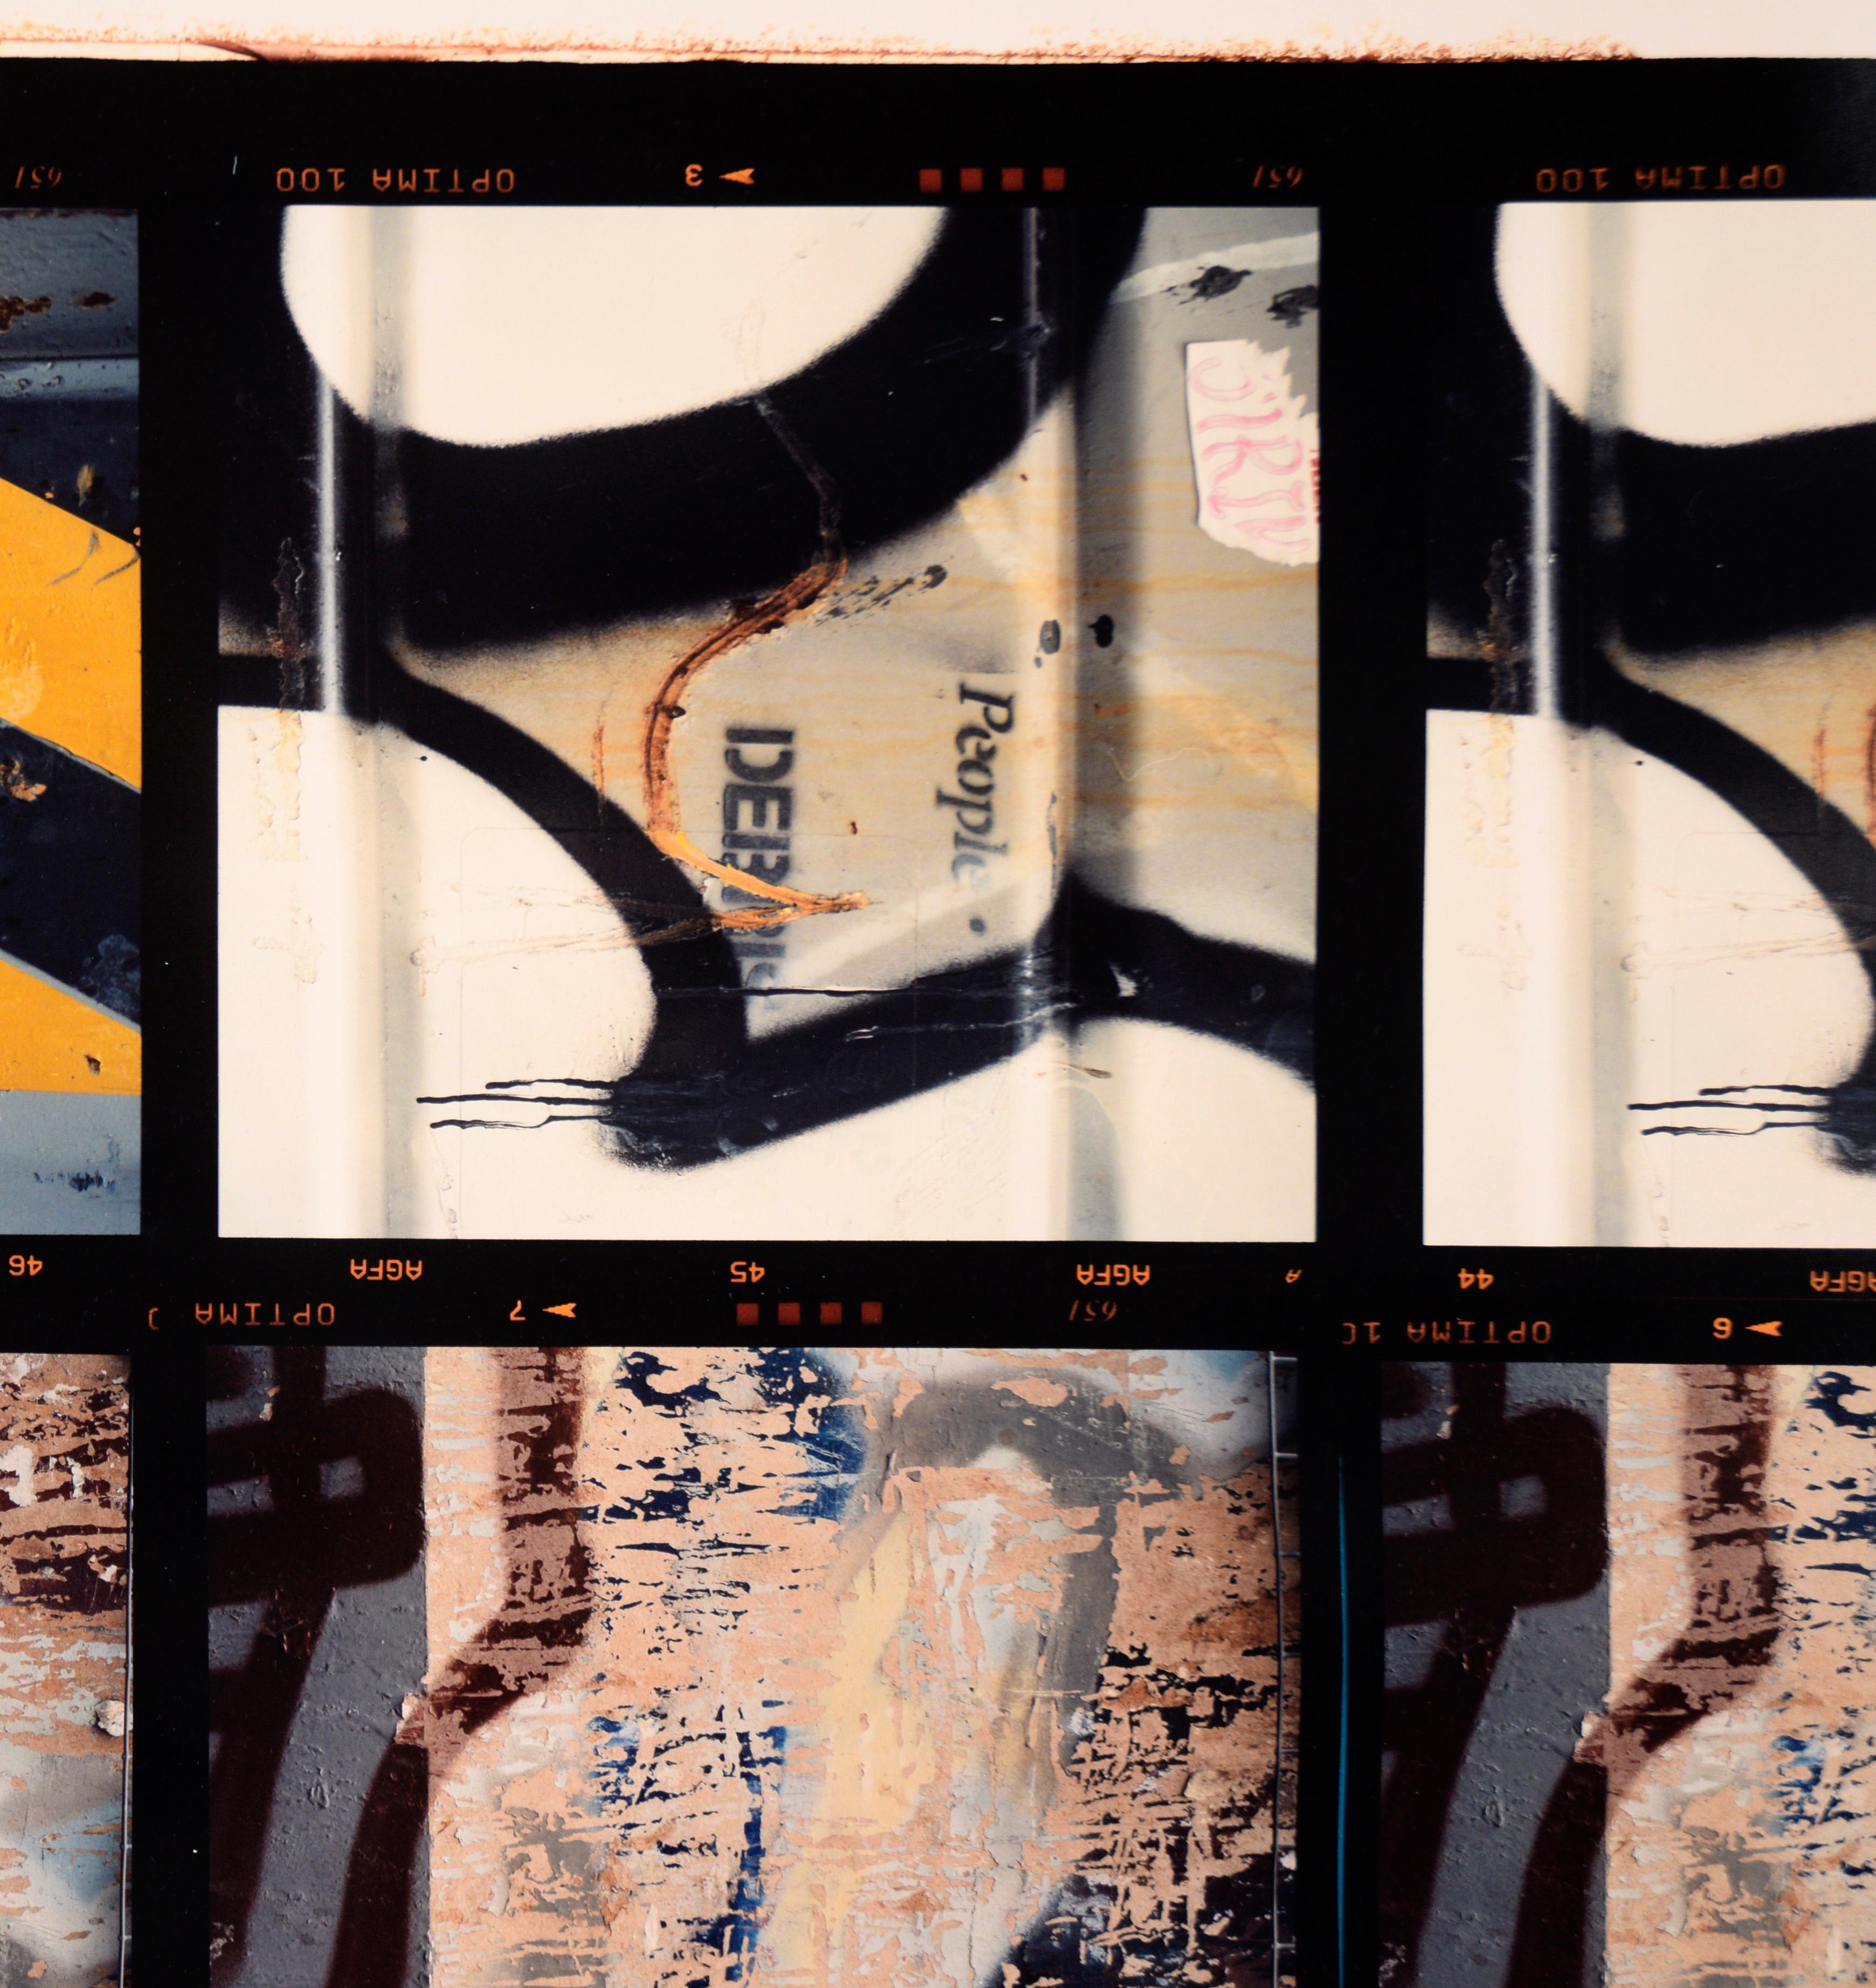 12 Photos (Graffiti and Stripes) - Large Scale Textural Photographs

Series of detailed macro photos by Bill Clark (American, 20th Century). This set of photos shows several textured and painted surfaces, both concrete and metal. A few of them have